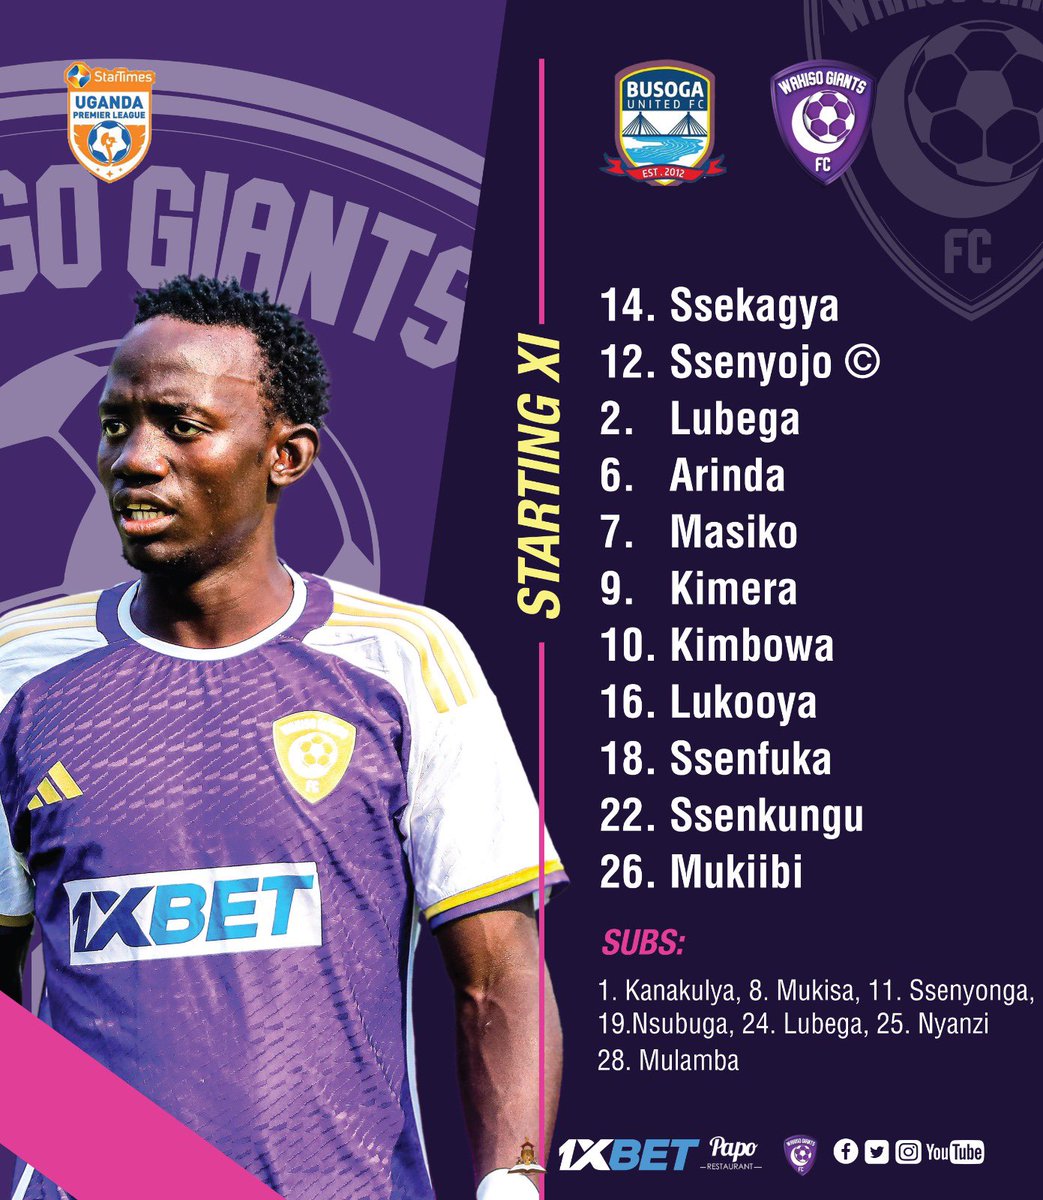 The match has just started. The players are out at last! We will take the kick-off. #WeAreThePurpleSharks #PrideOfWakiso #BUSWAK @1xBet_Eng